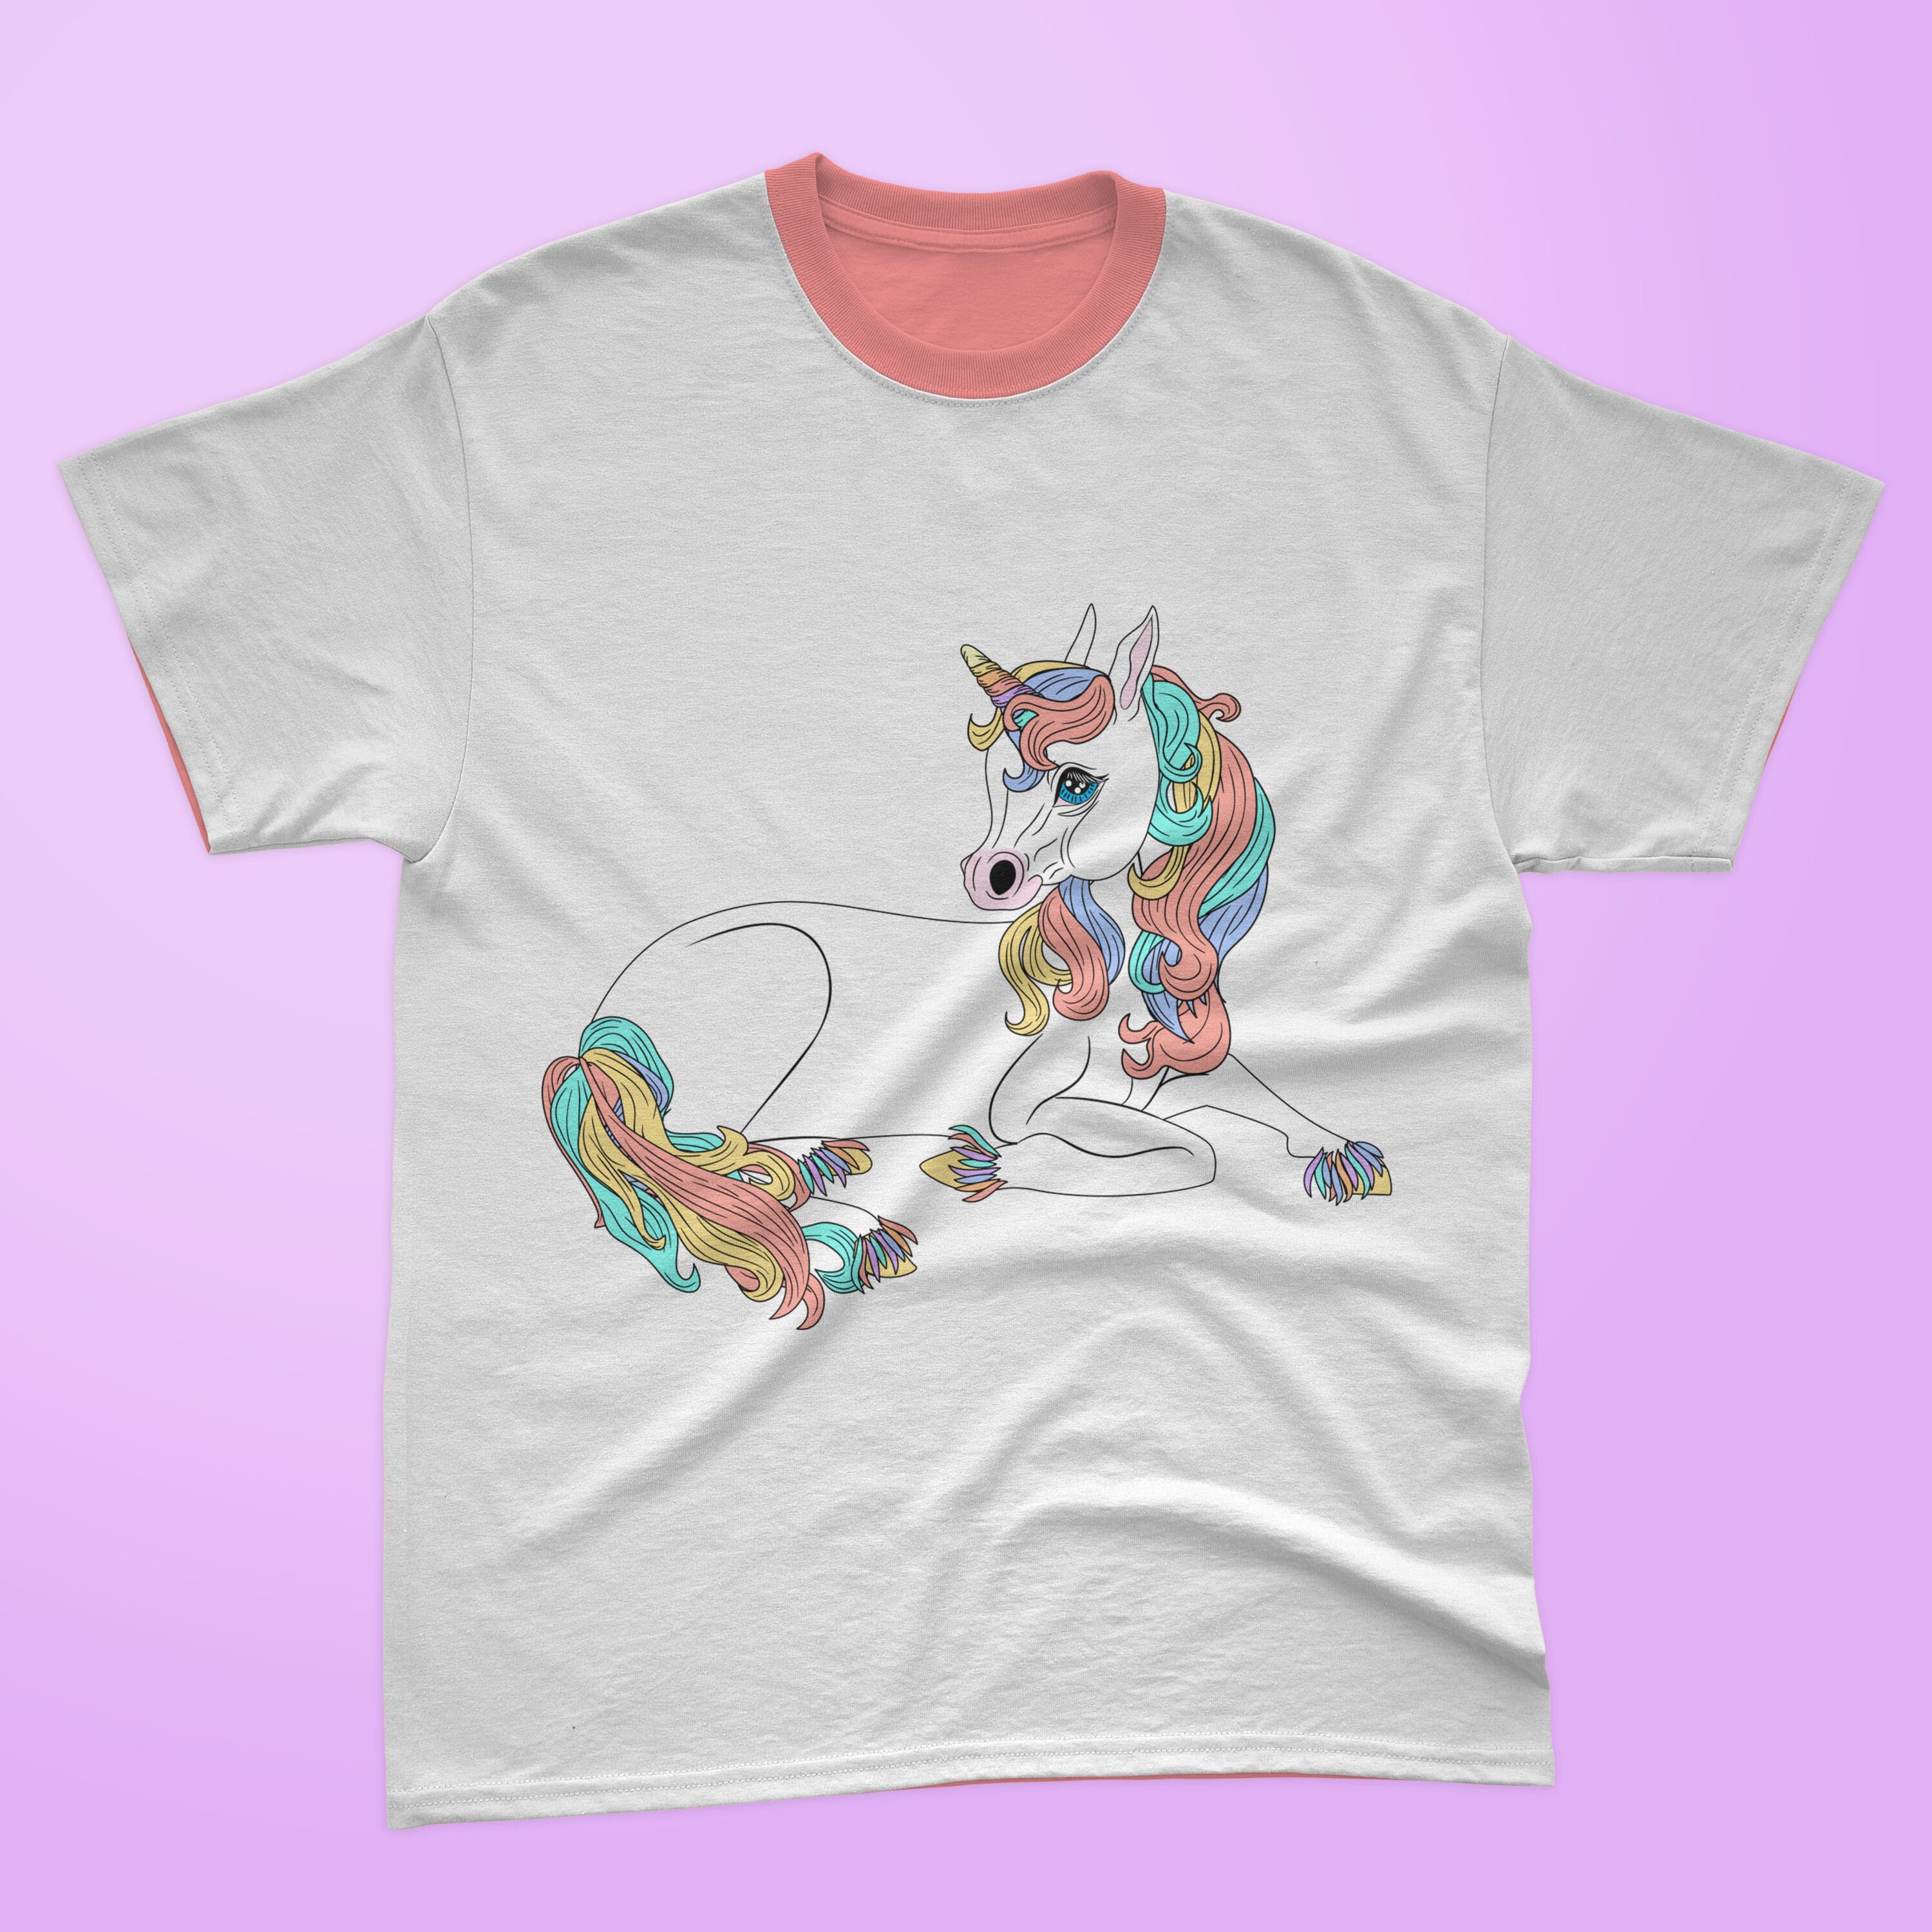 Gray t-shirt with a pink collar and a magical lying unicorn on a lavender background.